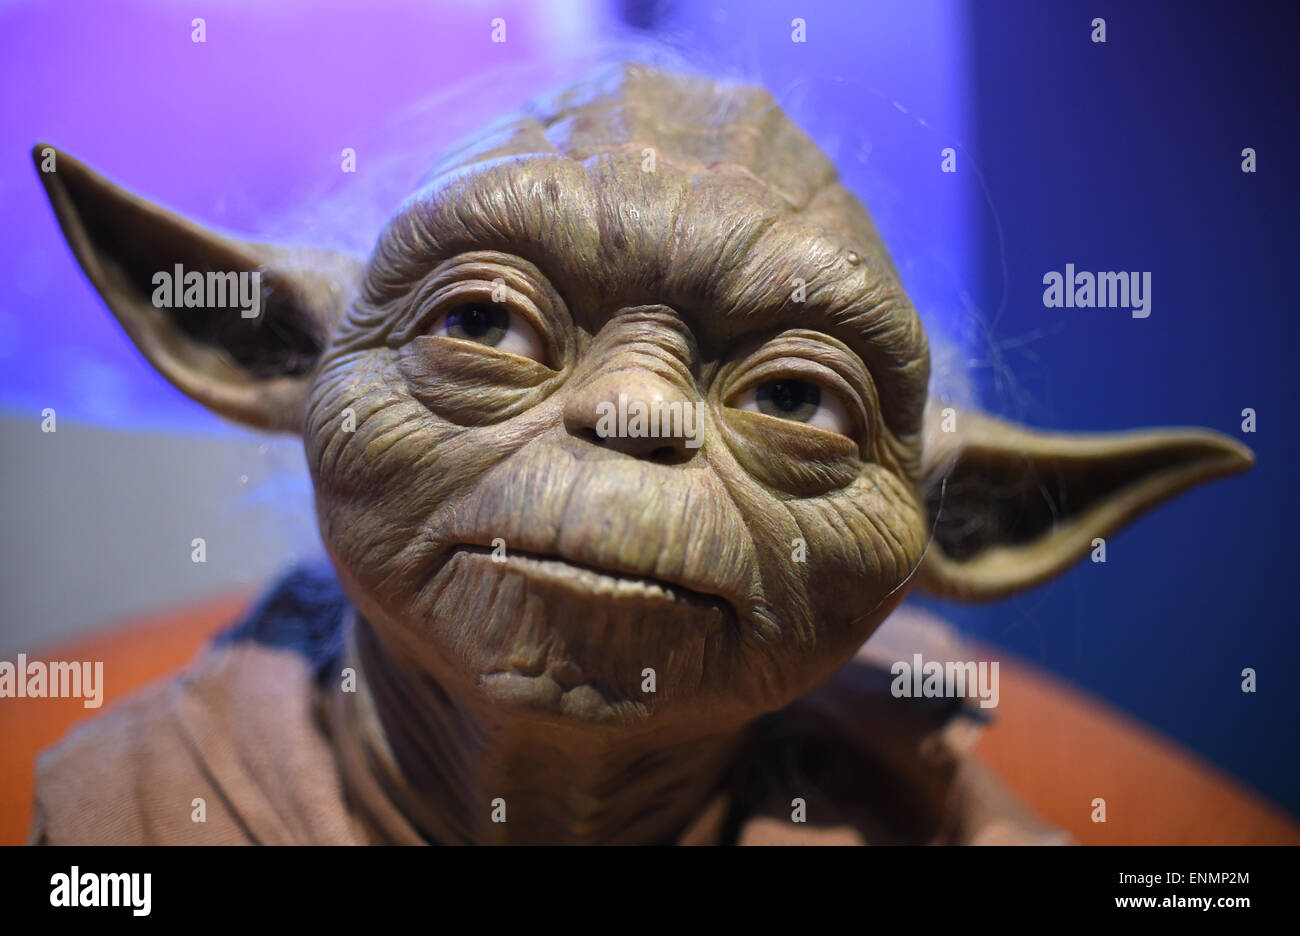 Berlin, Germany. 7th May, 2015. The wax figure of the Star Wars saga 'Yoda' and is on display in preparation for the world premiere exhibition 'Star Wars at Madame Tussauds' at the Madame Tussauds wax museum in Berlin, Germany, 7 May 2015. Eleven figures in three key scenes of the saga will be unveiled on 12 May 2015. Photo: Britta Pedersen/dpa ( IN CONNECTION WITH CURRENT REPORTING)/dpa/Alamy Live News Stock Photo